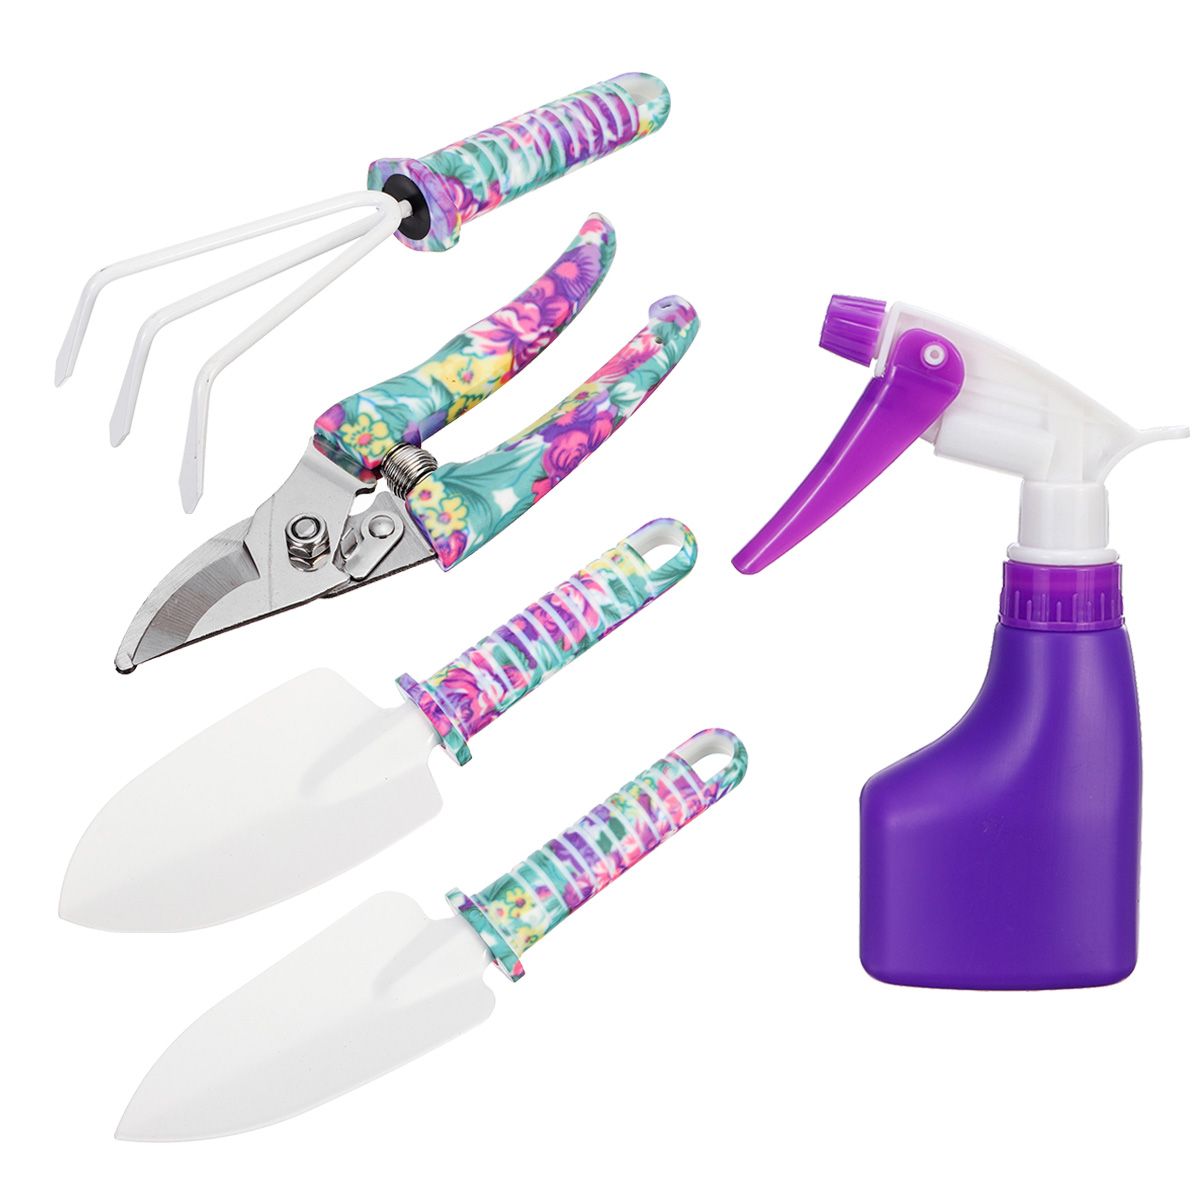 510Pcs-Gardening-Plant-Tool-Set-Garden-Yard-Plant-Flower-Care-Hand-Tools-with-Case-1719696